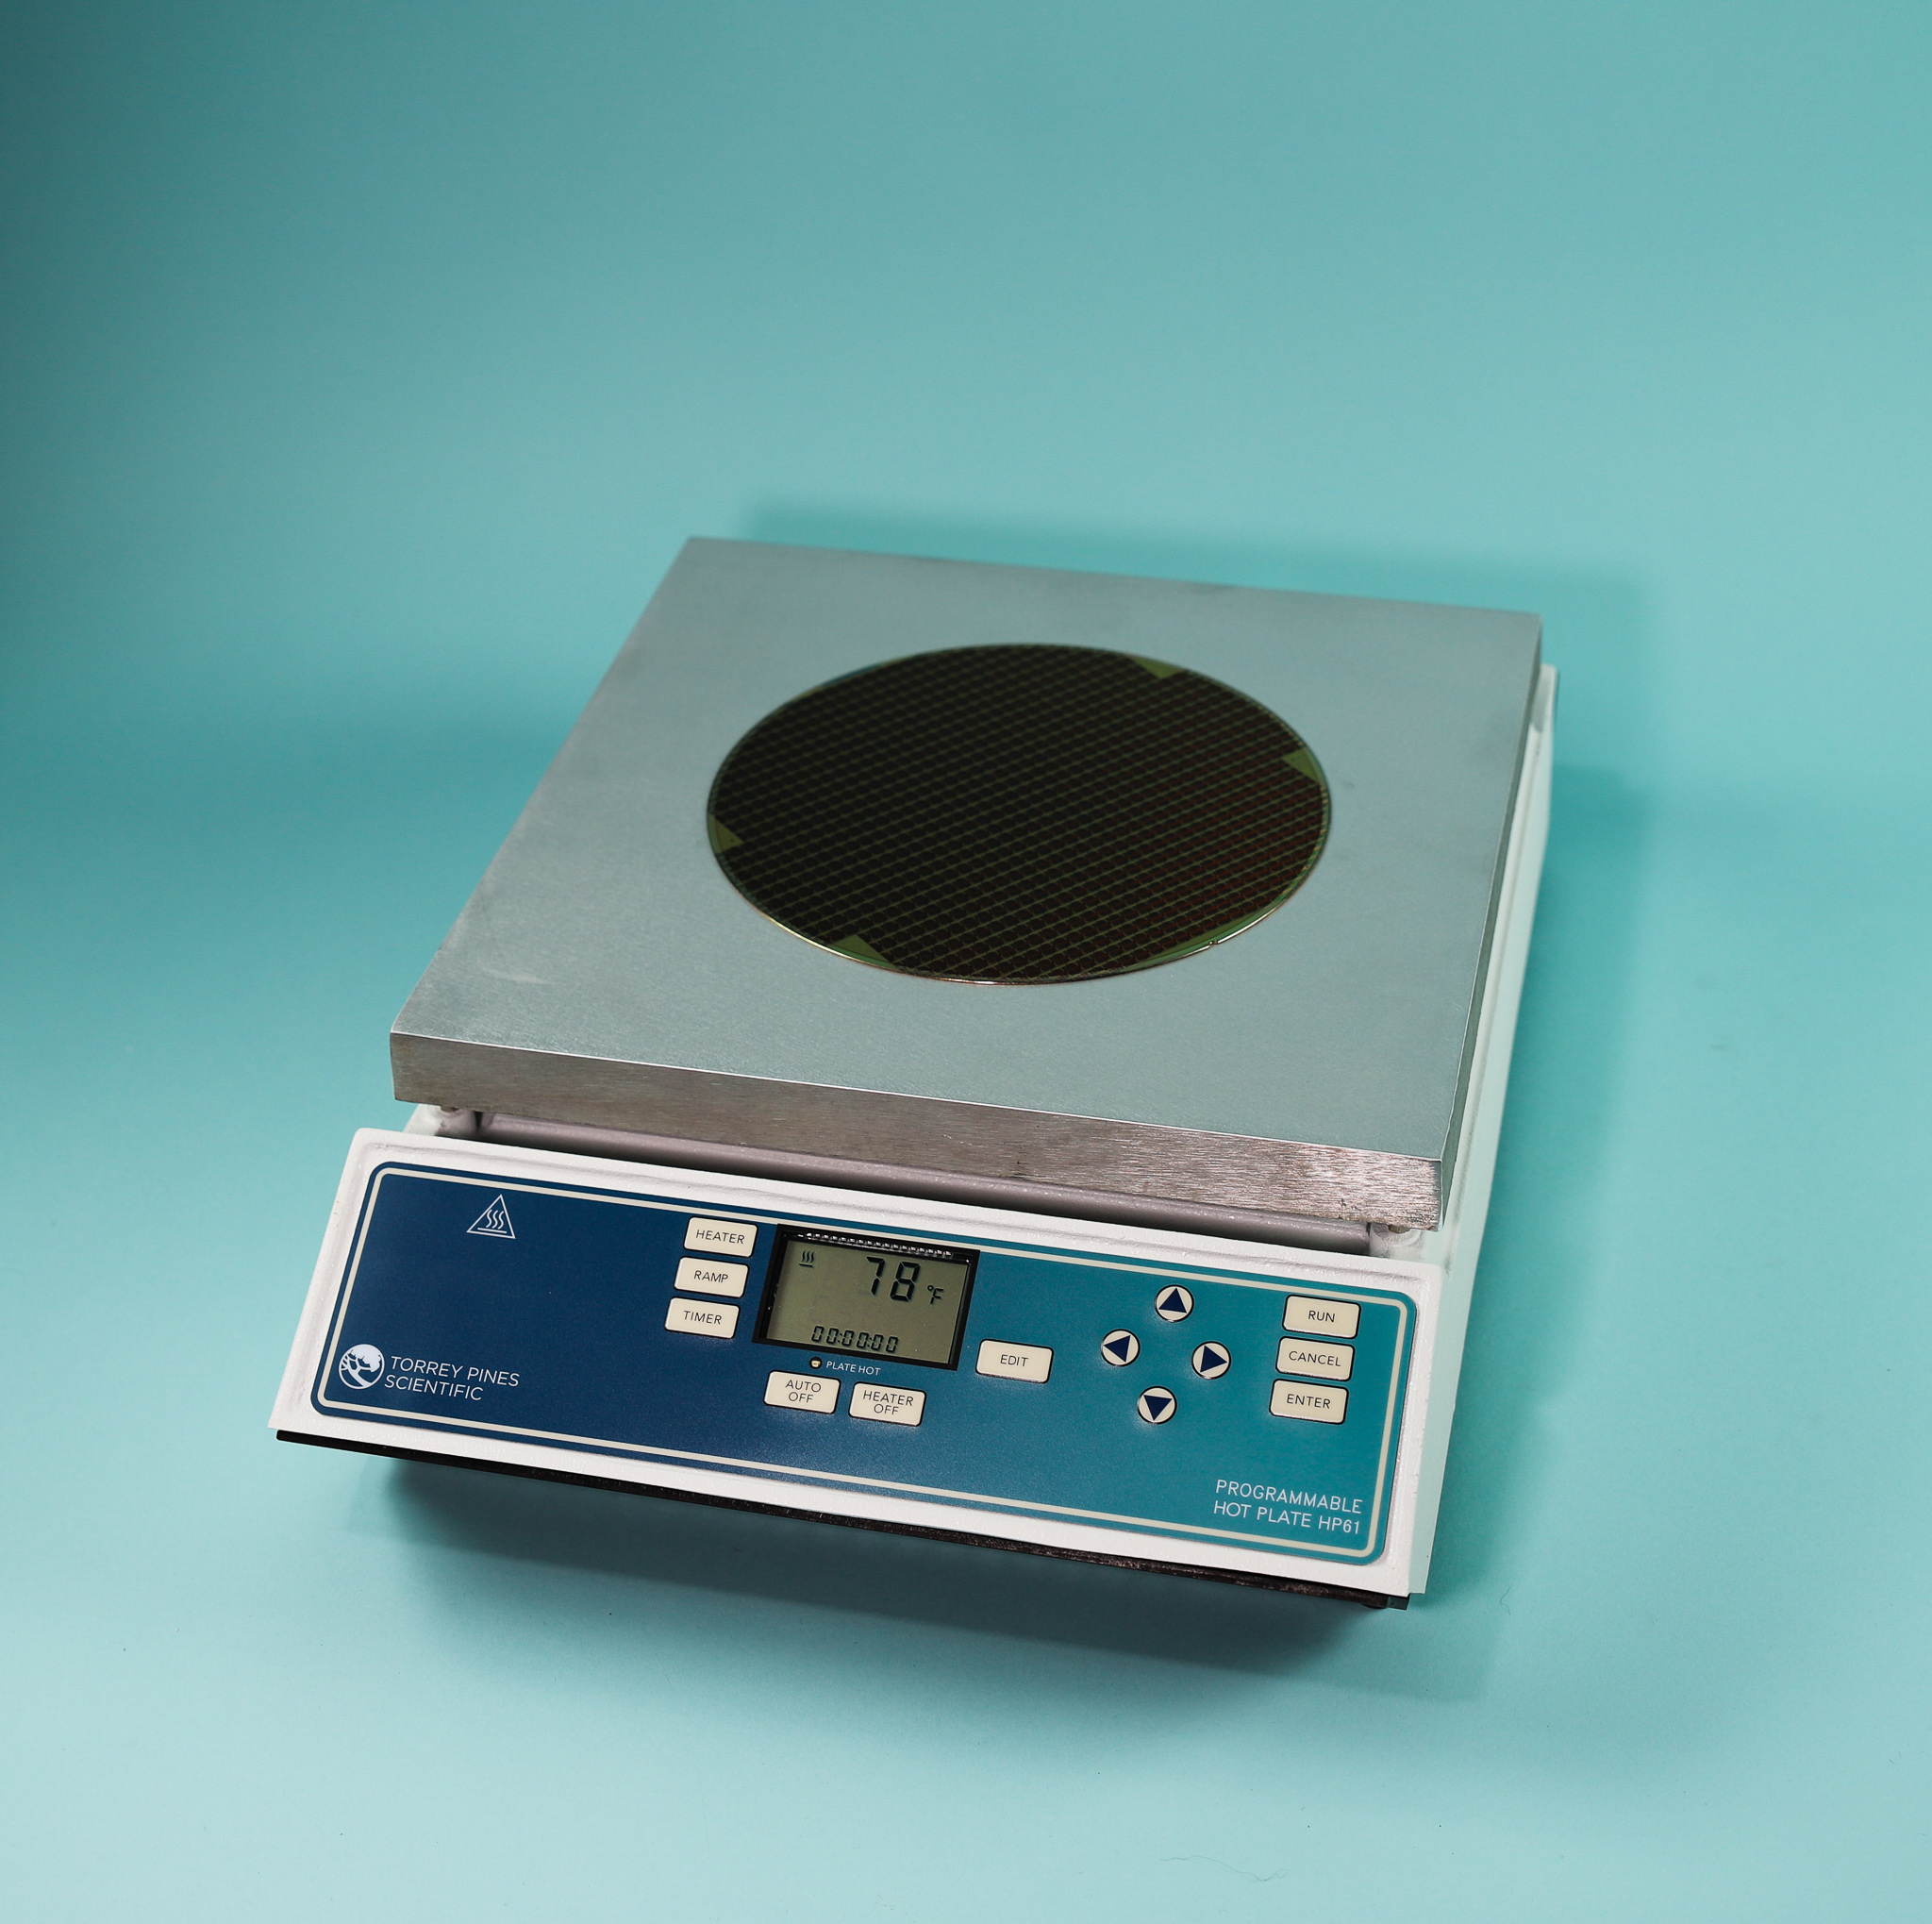 Explore Wholesale hot plate with digital temperature control From